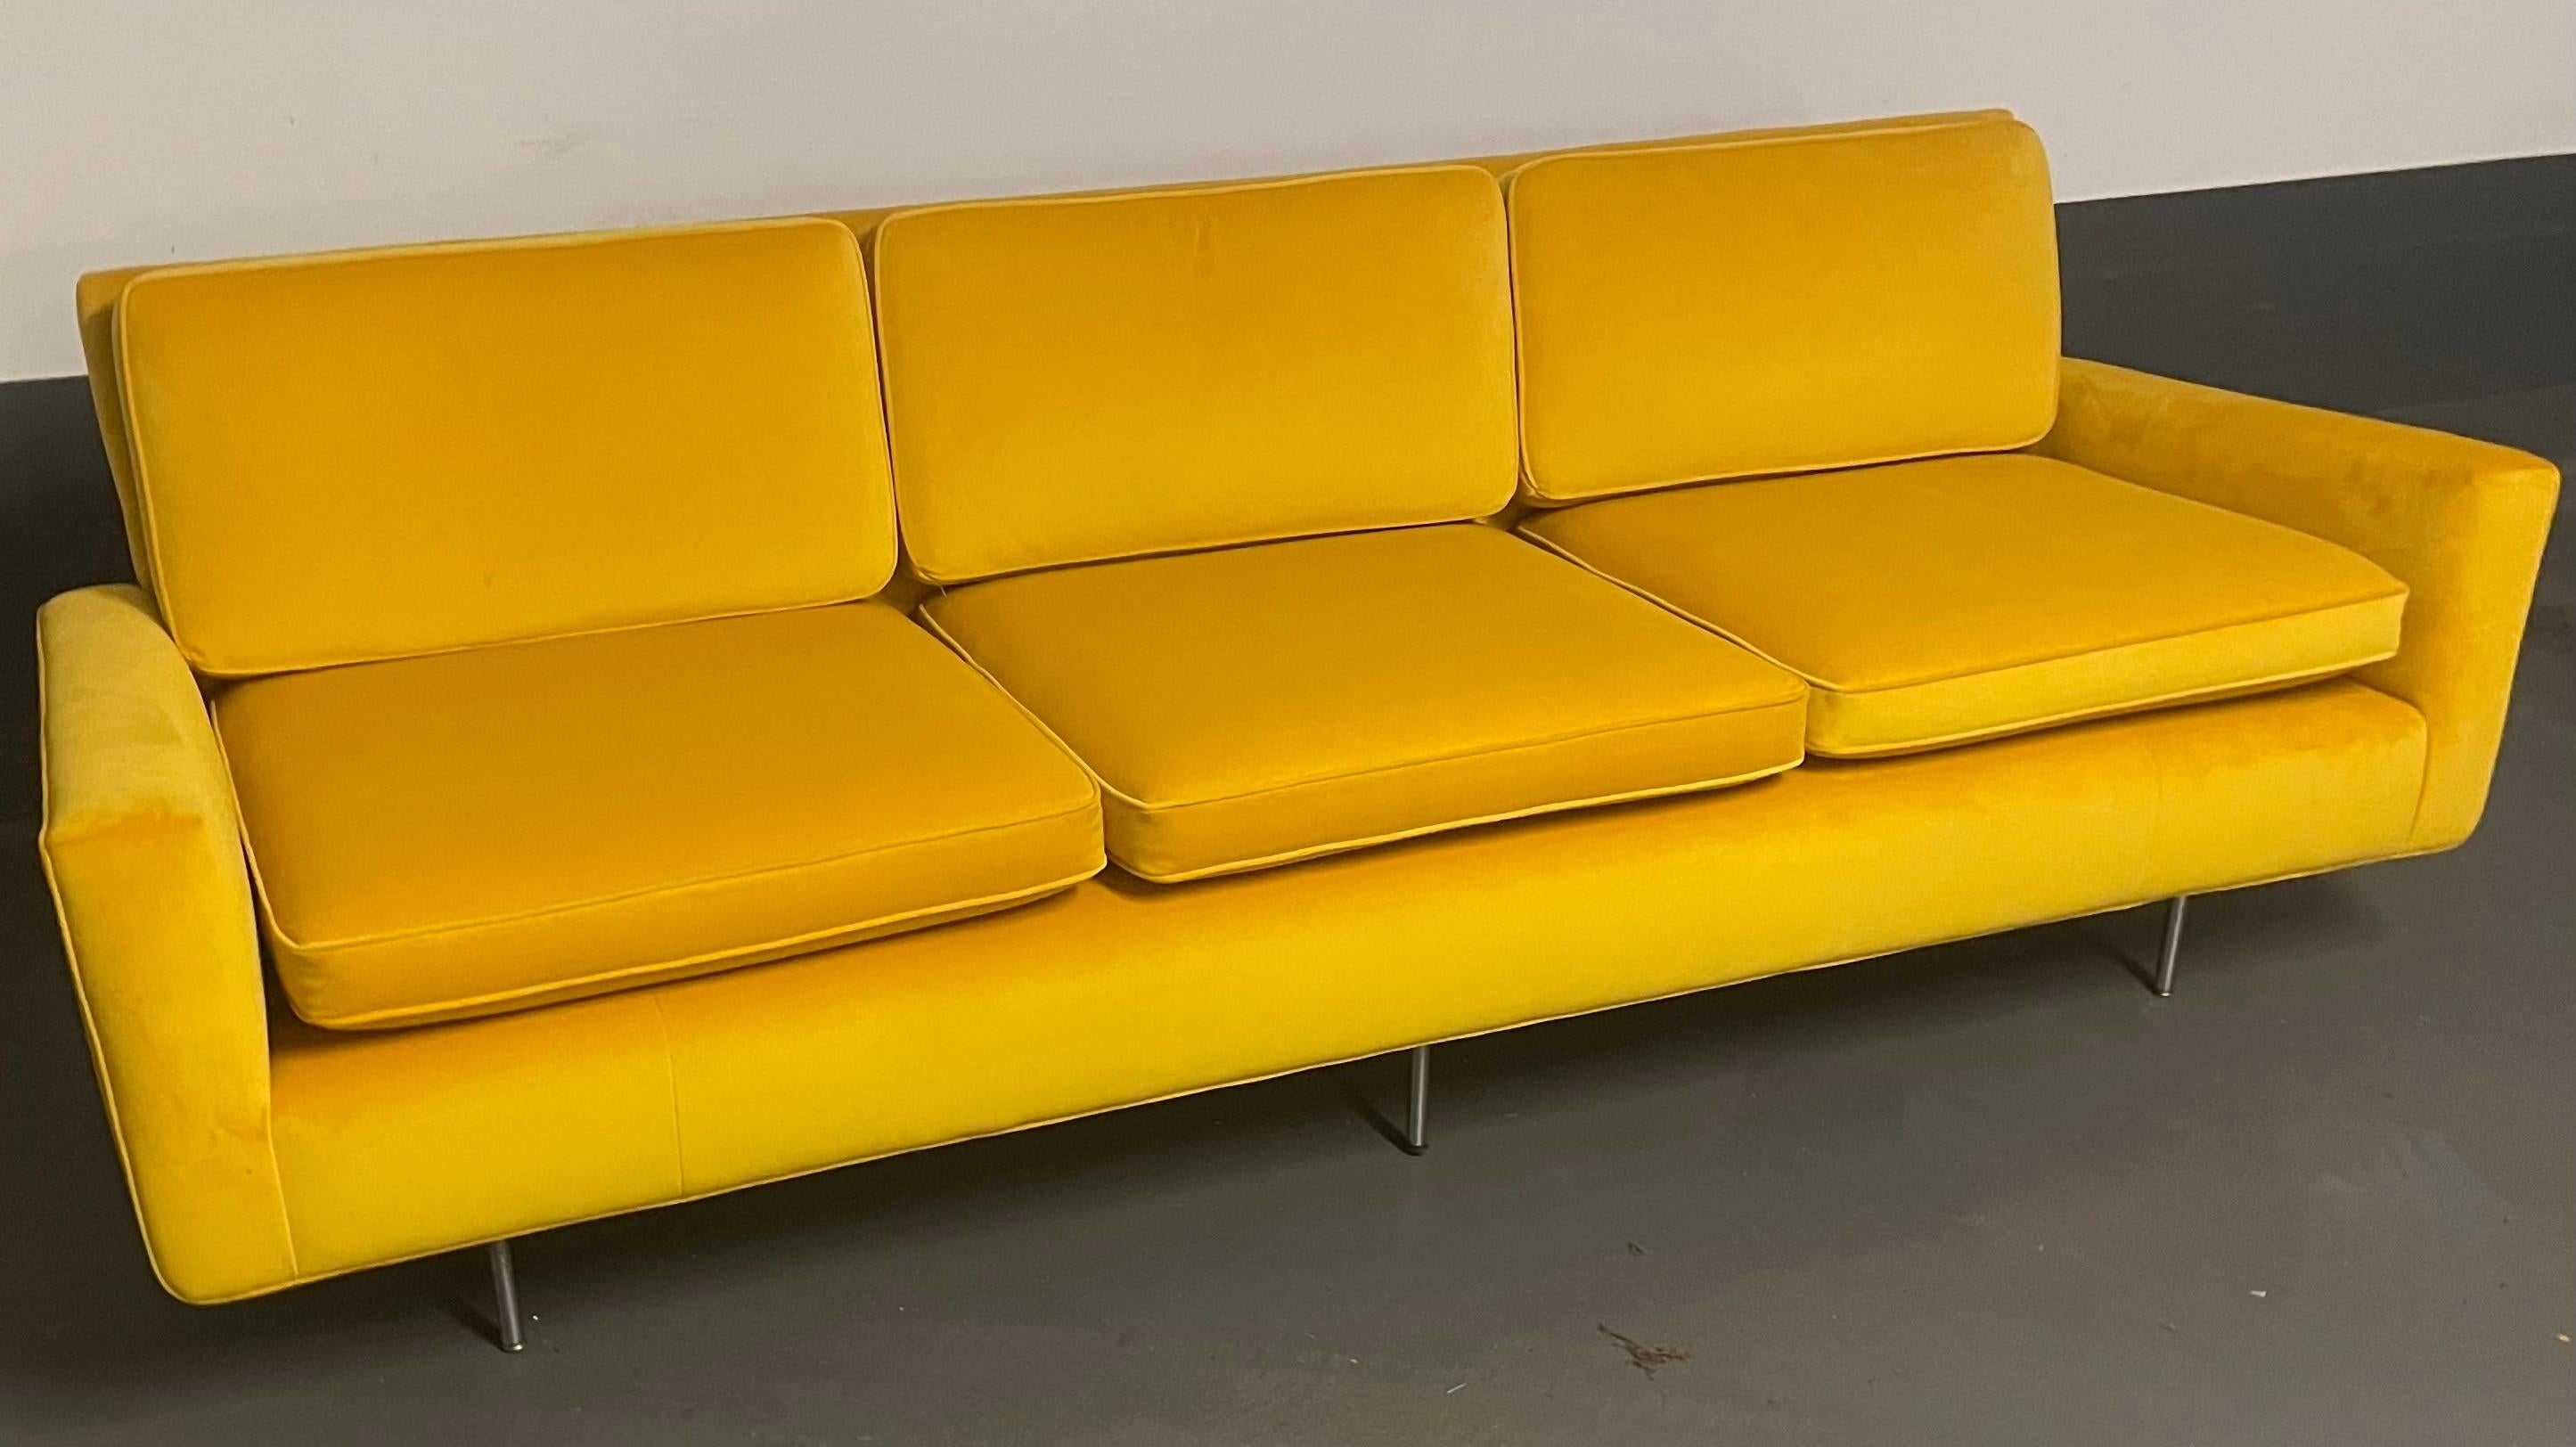 German Wonderful No. 26 Sofa by Florence Knoll for Knoll International For Sale